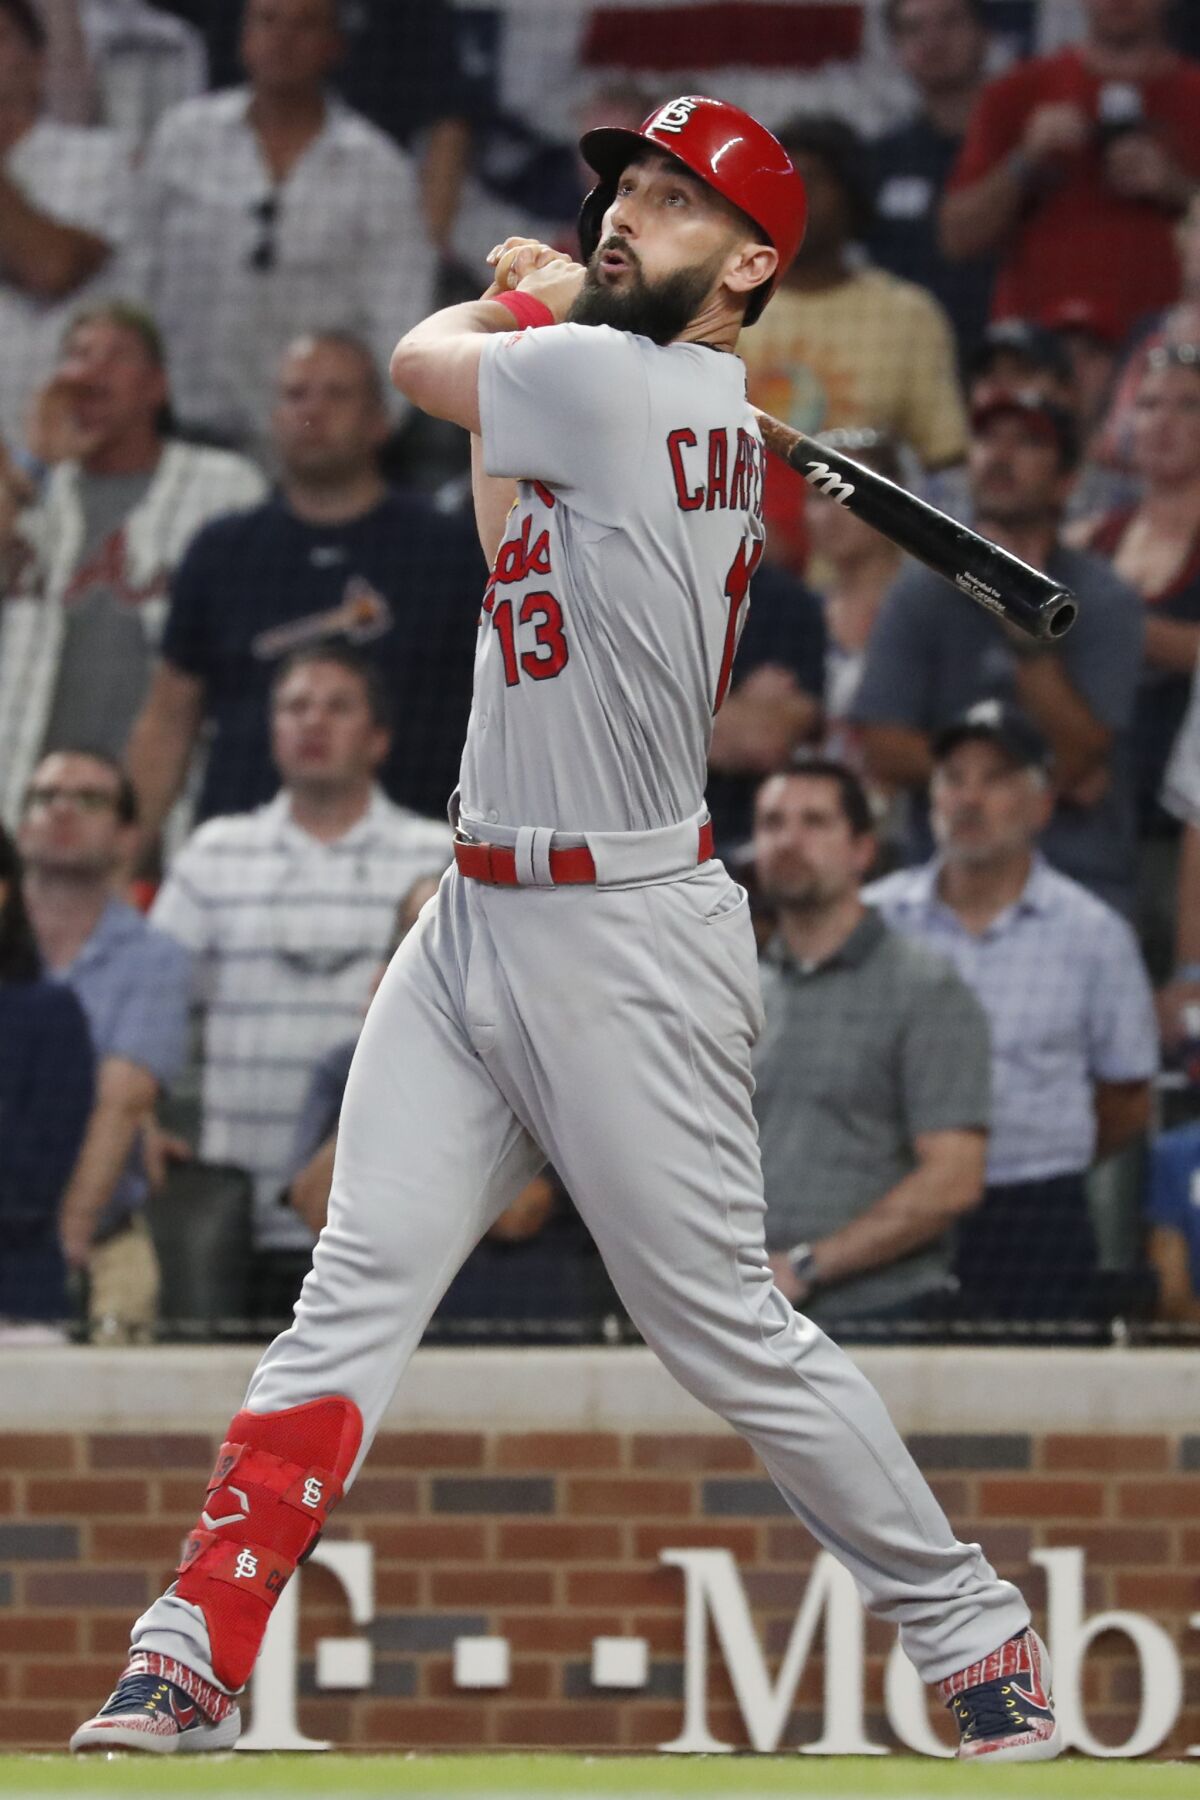 St. Louis Cardinals third baseman Matt Carpenter (13) watches his his RBI single in the eighth inning during Game 1 of a best-of-five National League Division Series agaimst the Atlanta Braves, Thursday, Oct. 3, 2019, in Atlanta. (AP Photo/John Bazemore)